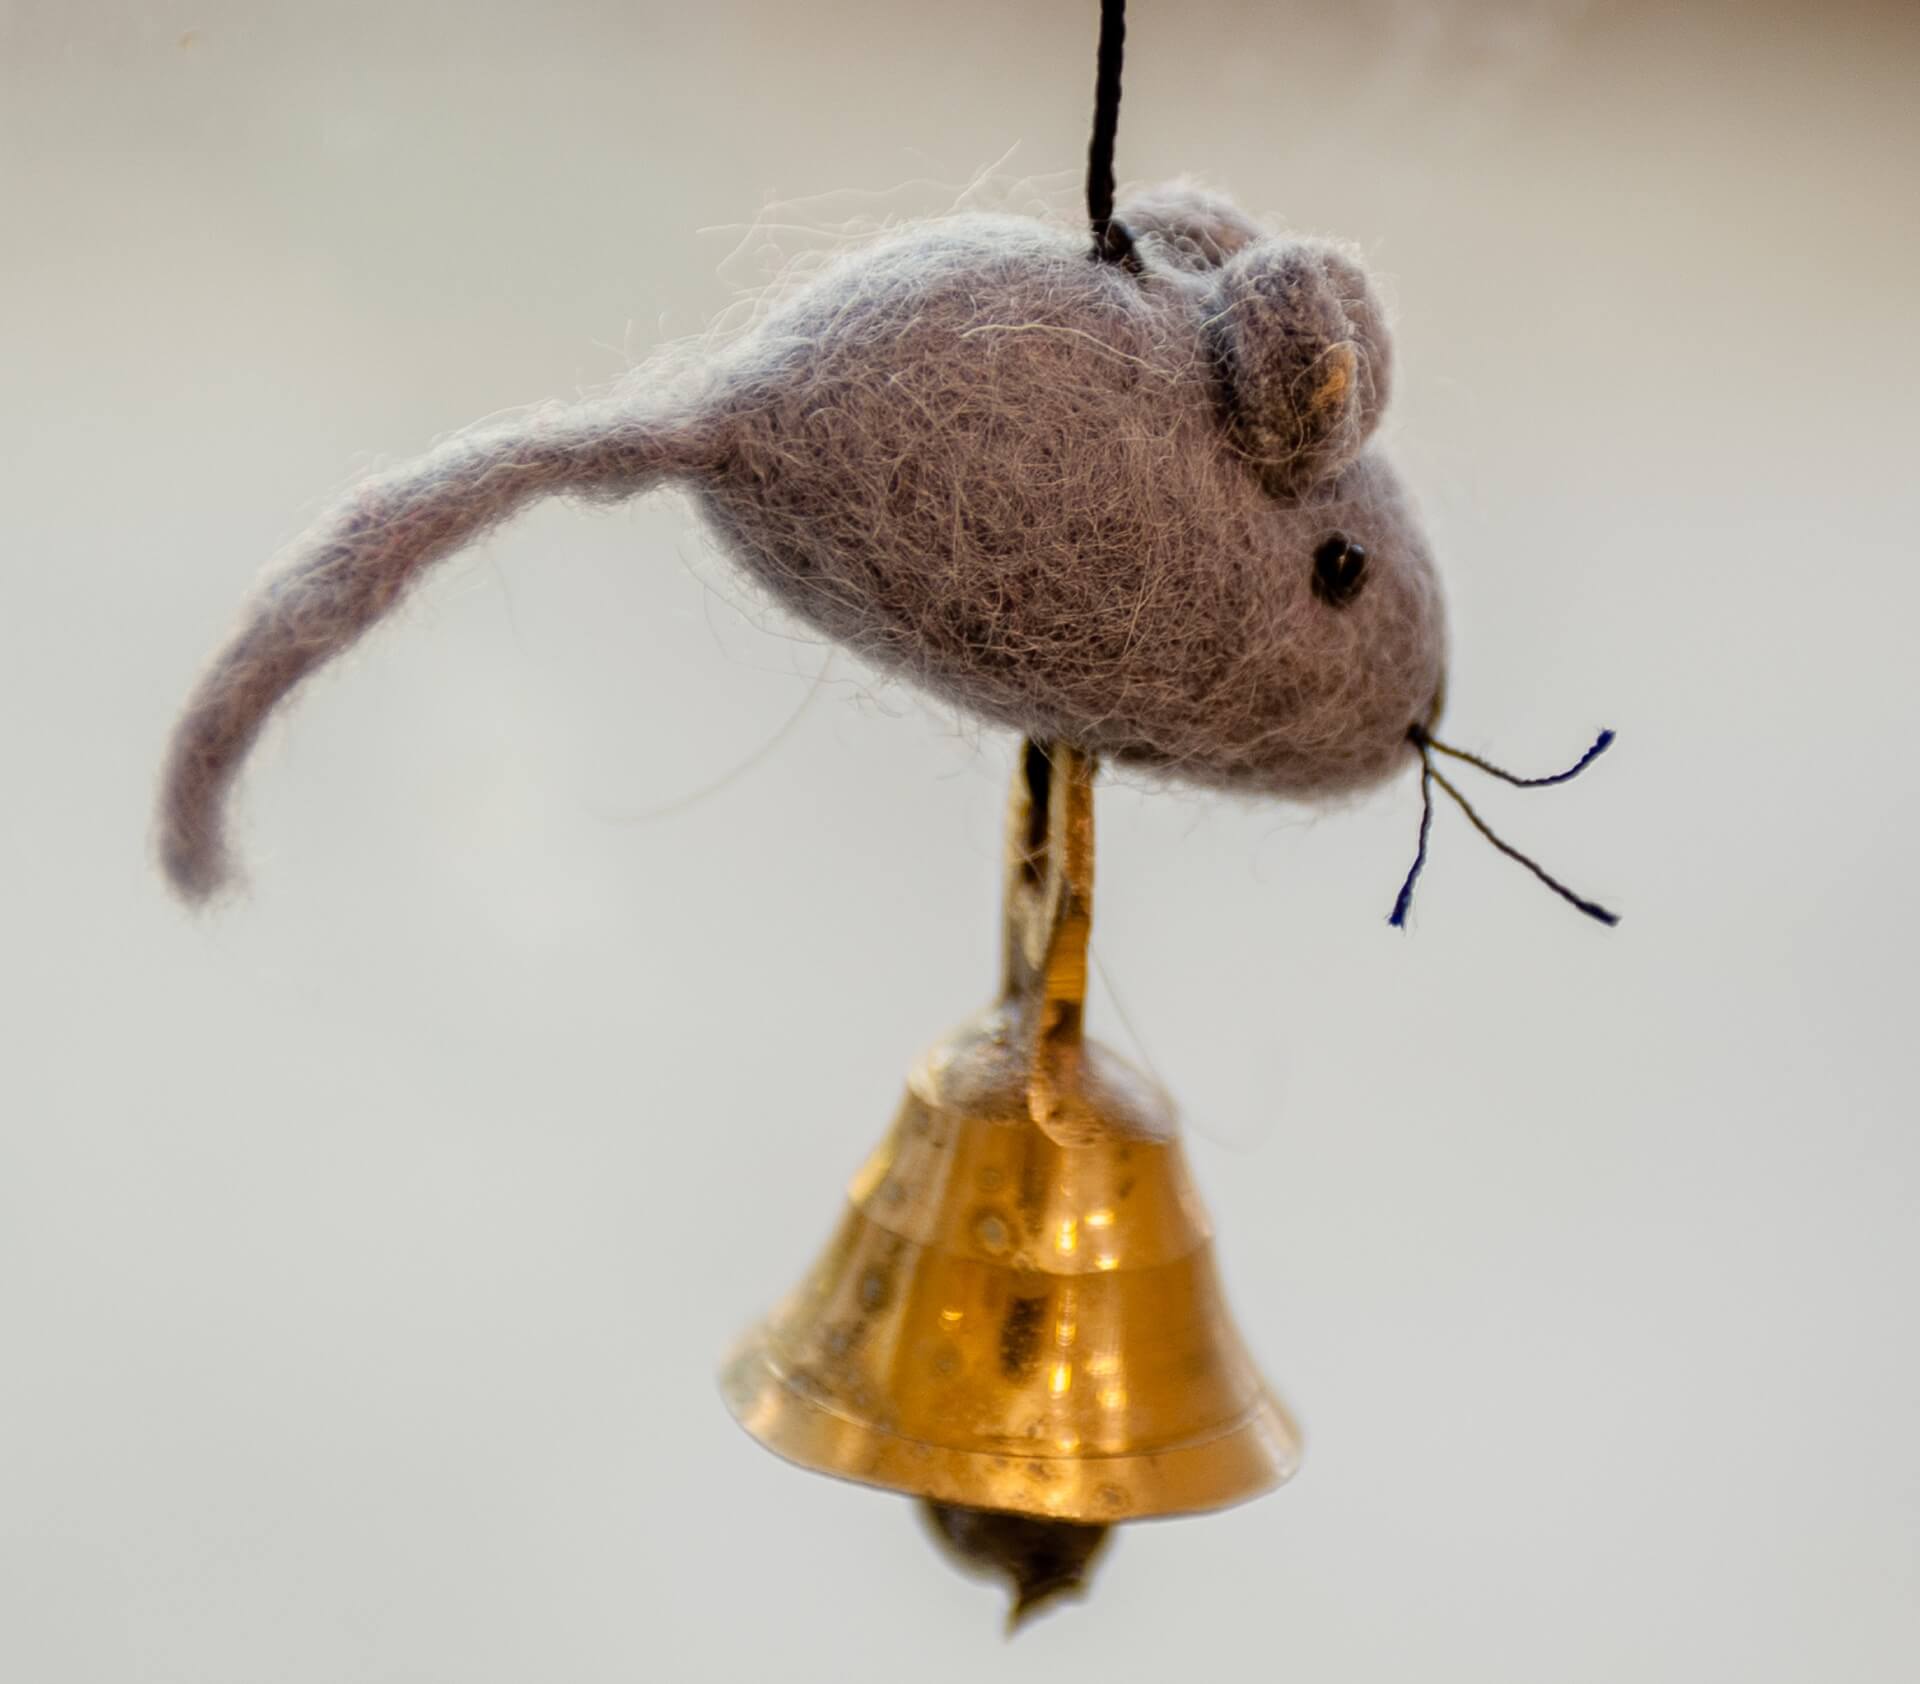 A mouse toy from a bell